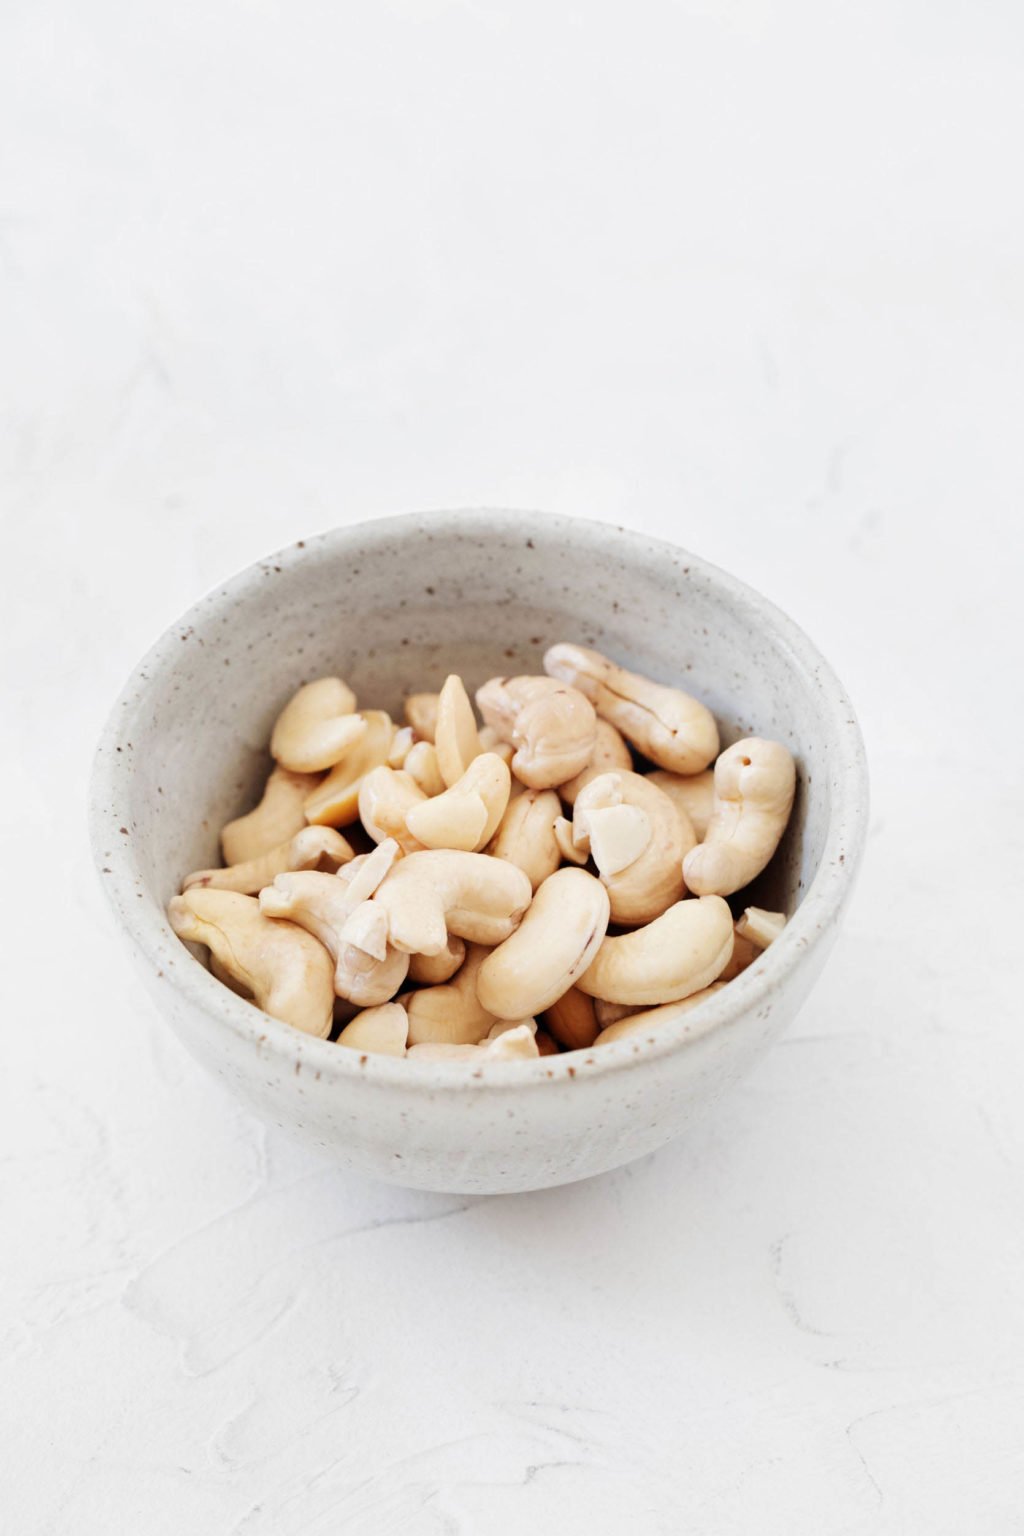 A small, ceramic pinch bowl is filled with nuts. It rests on a white surface.